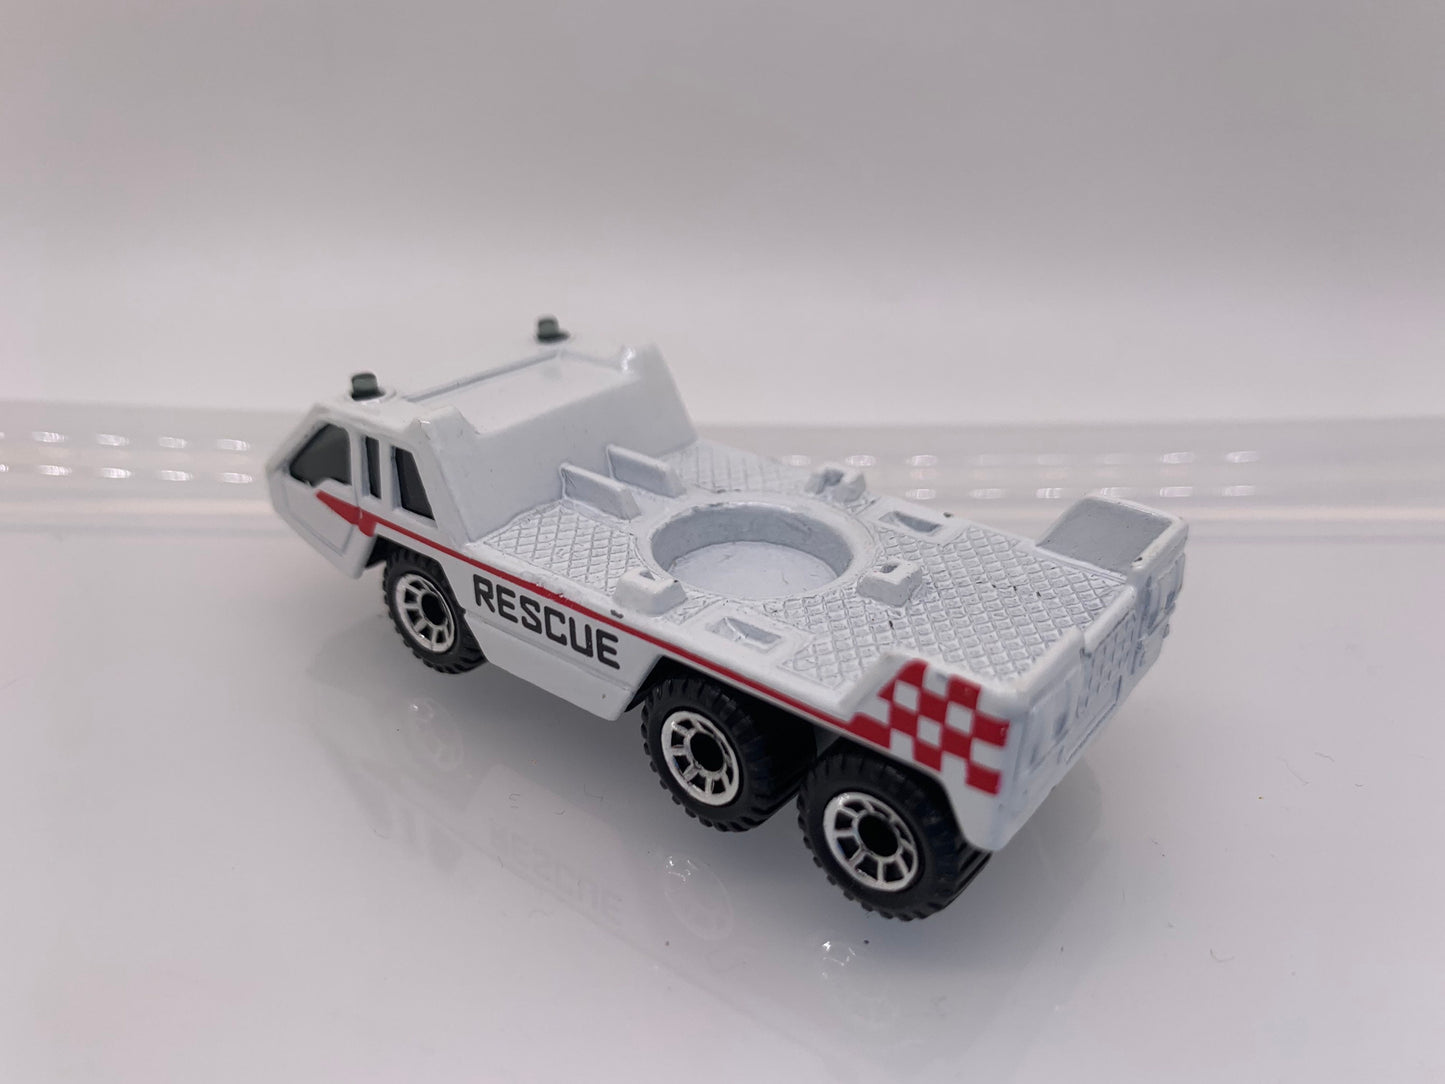 Matchbox Transporter Vehicle White Rescue Perfect Birthday Gift Miniature Collectable Model Toy Car